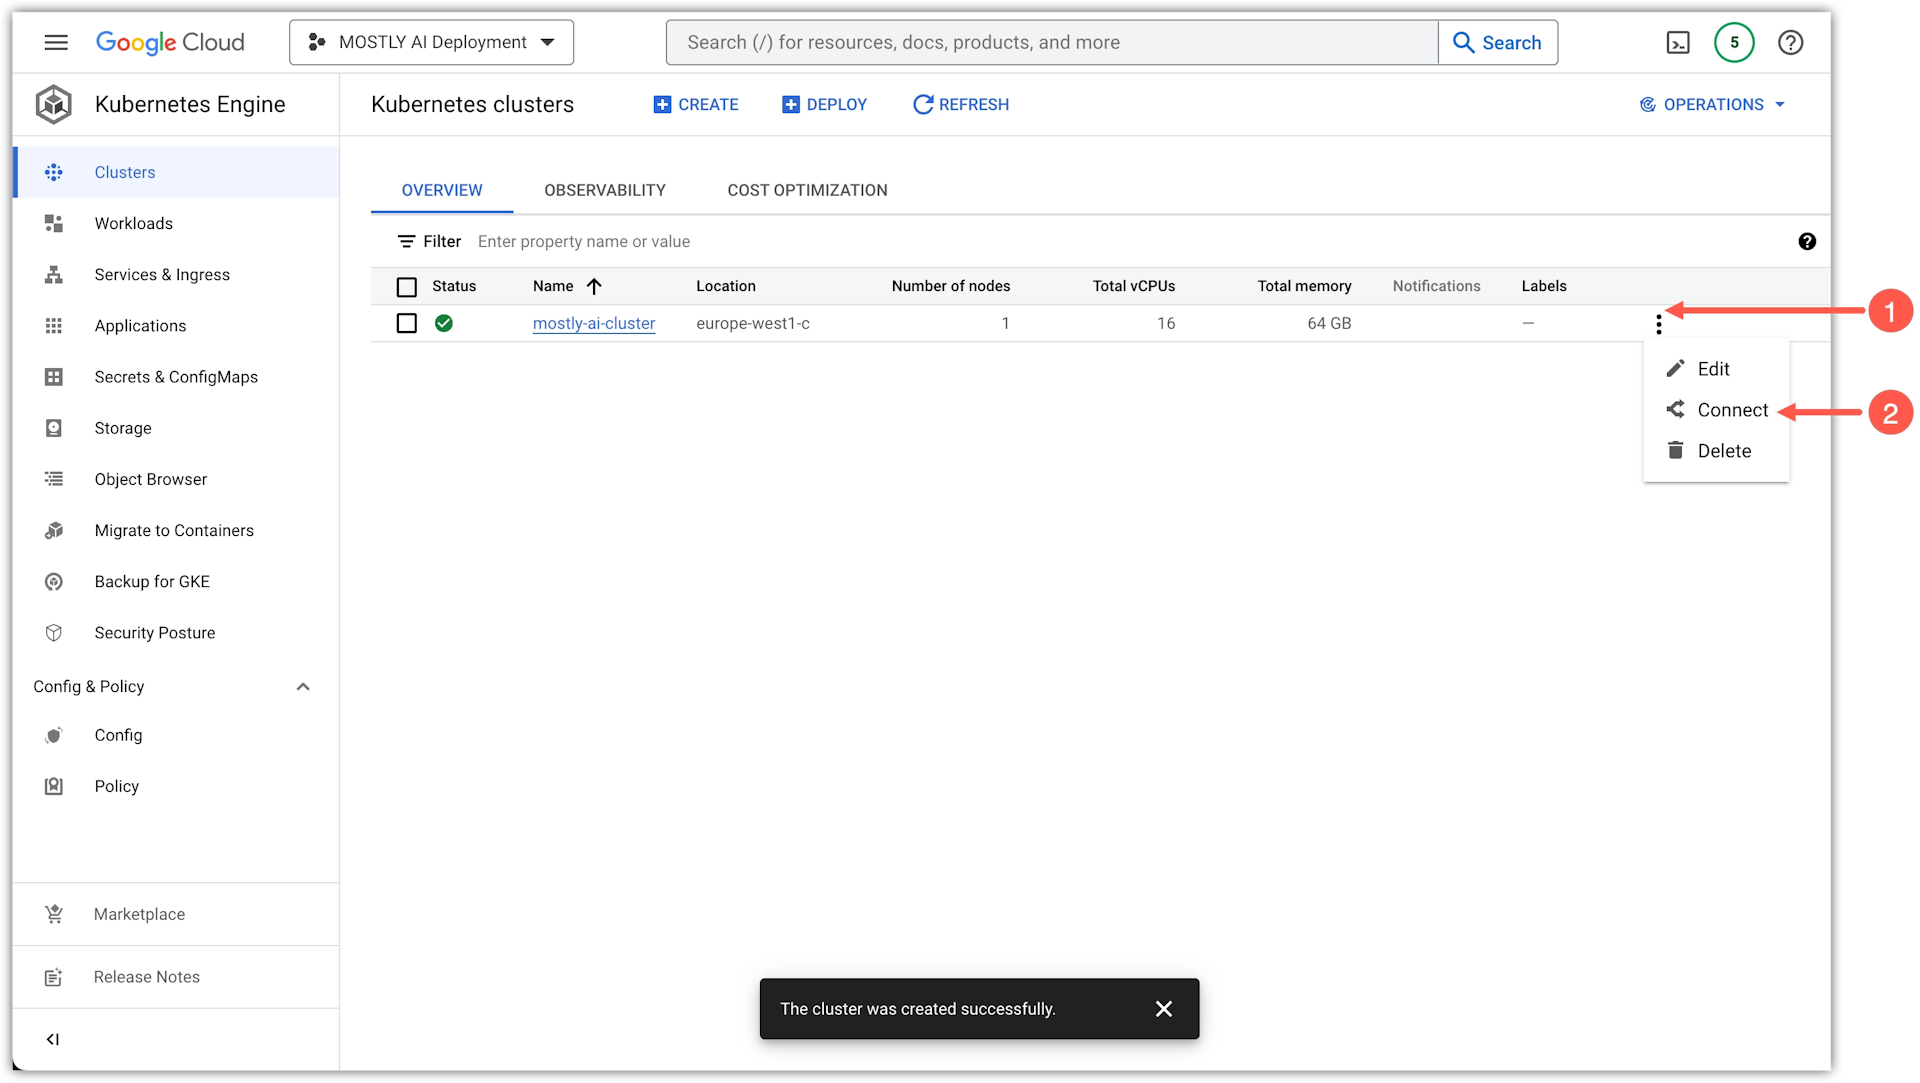 Google Cloud GKE - Select Connect to cluster